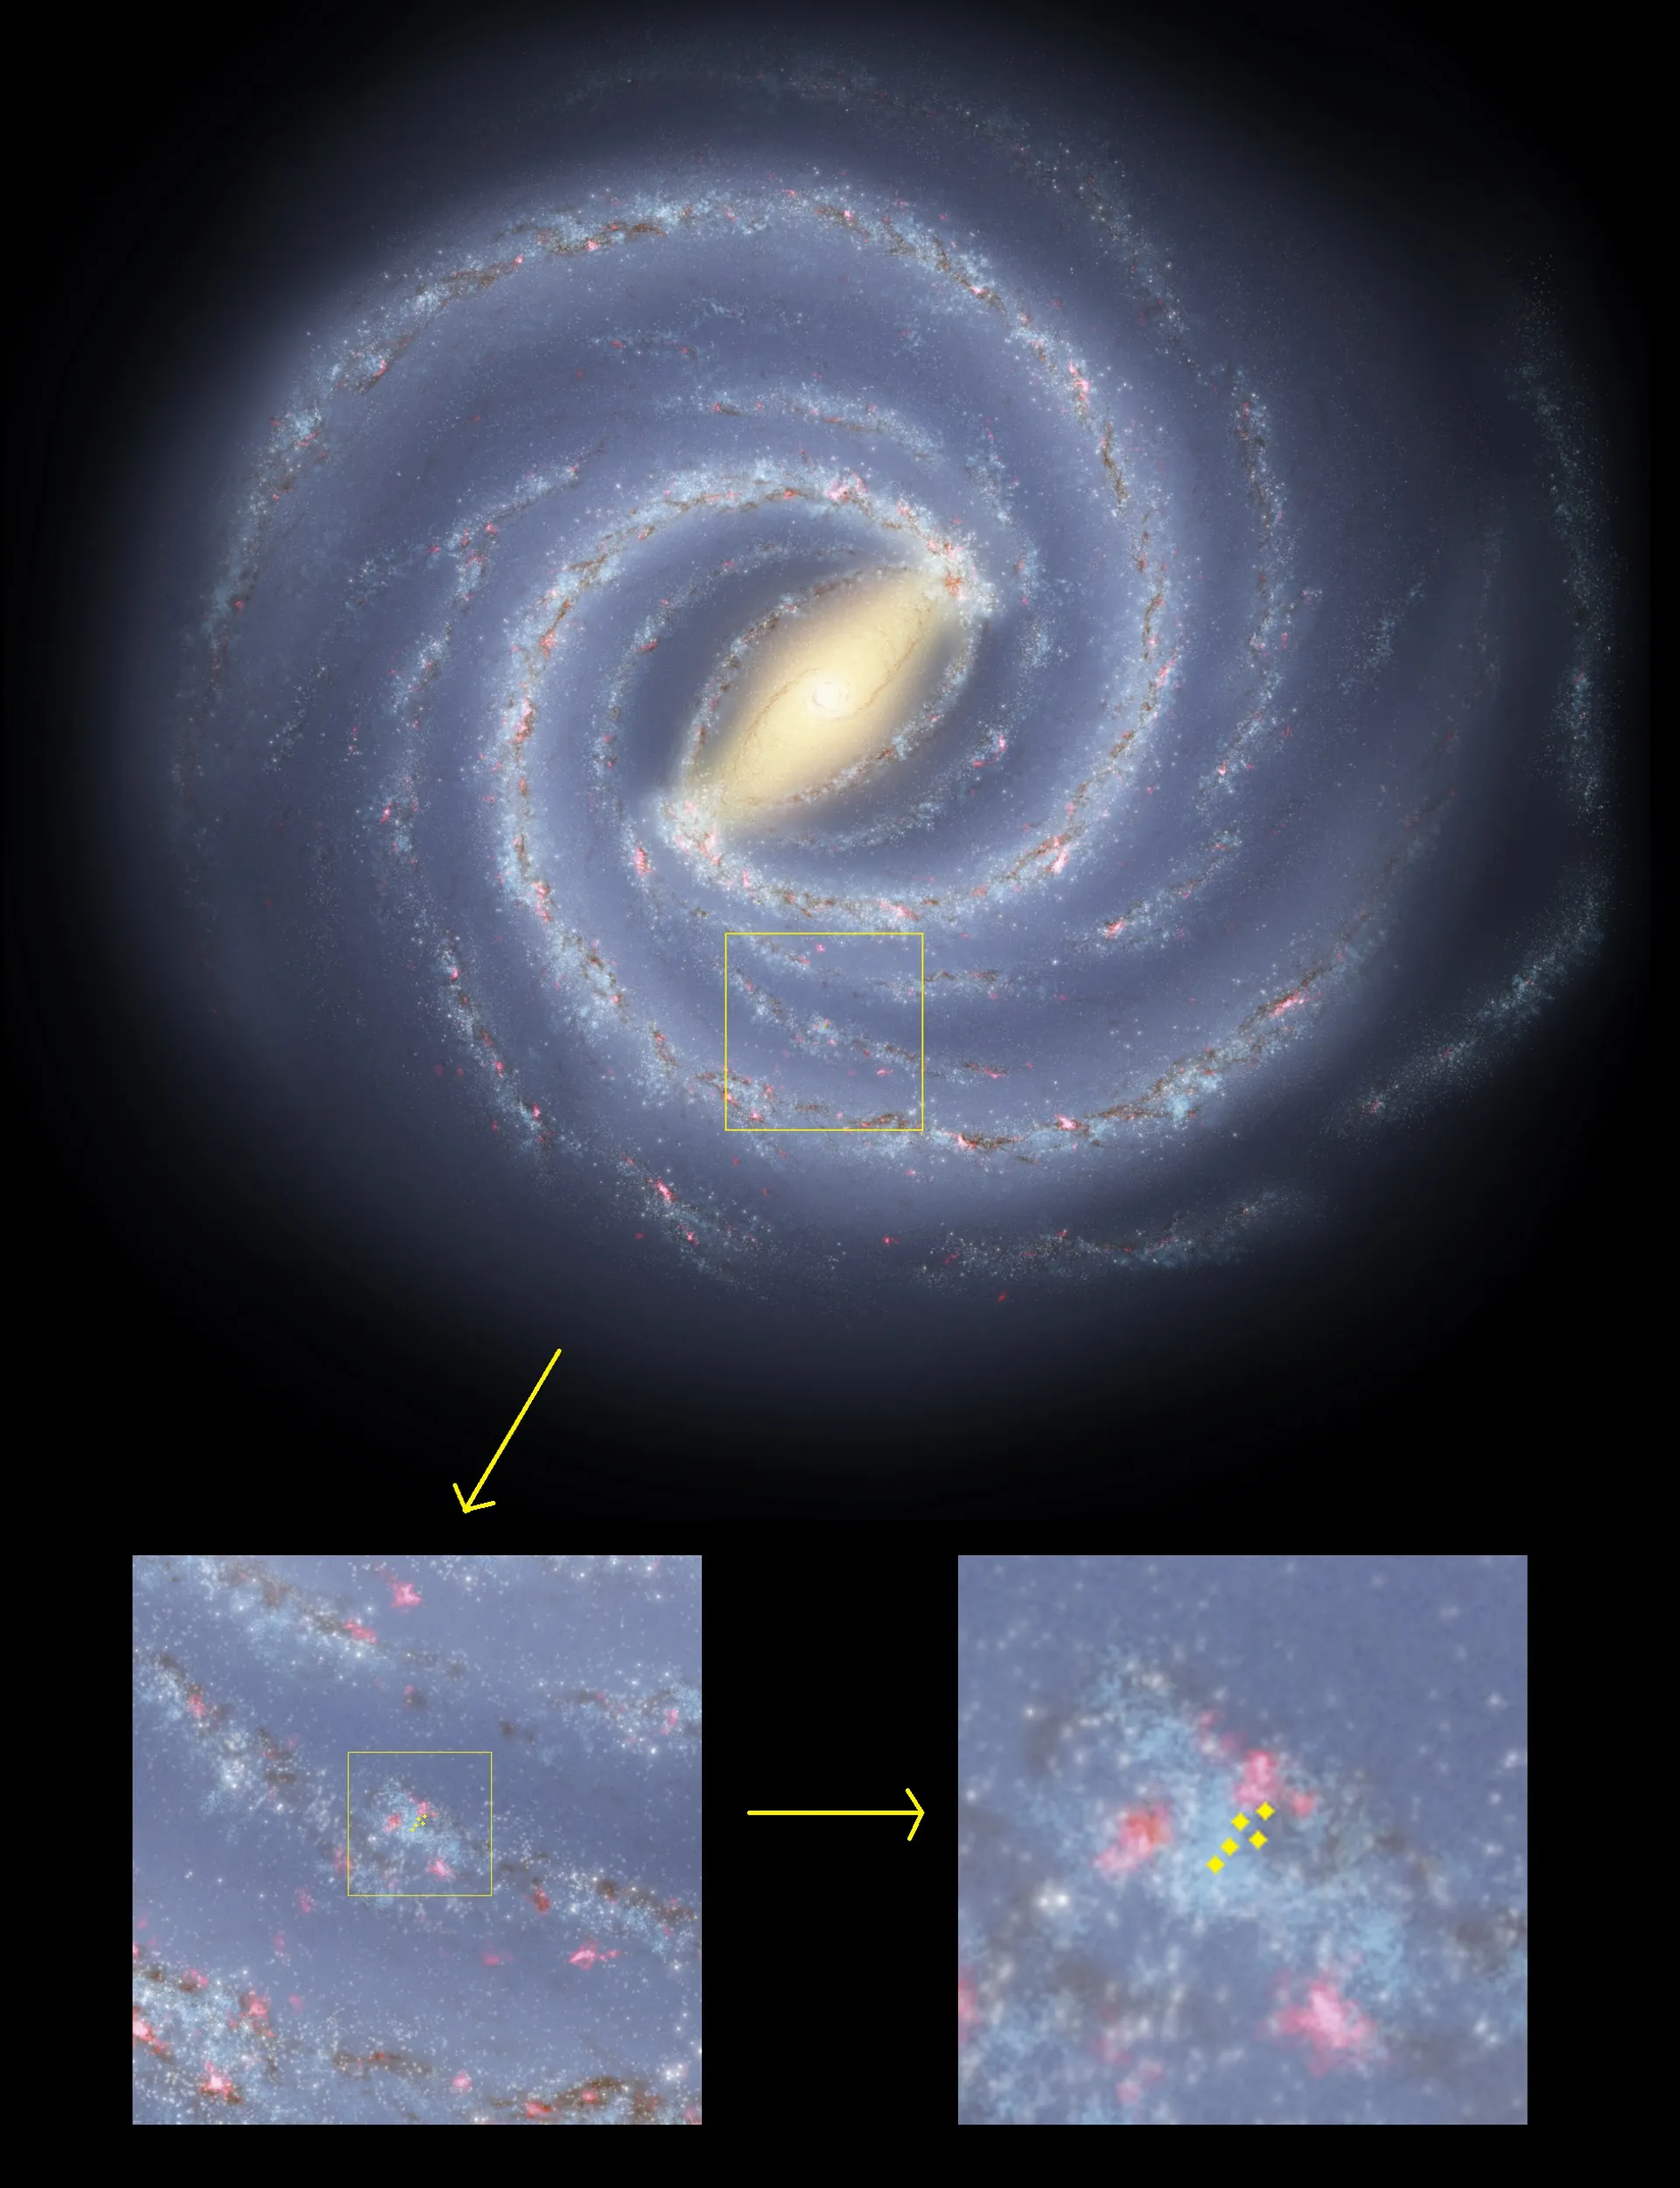 Artist rendering of Milky Way galaxy as seen from above with a square outlining an area halfway between center an edge indicating the insert image that shows an enlarged area seen in the next image. That next image shows five yellow points around which is another square outlining the insert that is shown in the next image which is closer to the five yellow points showing locations of planets in future stories